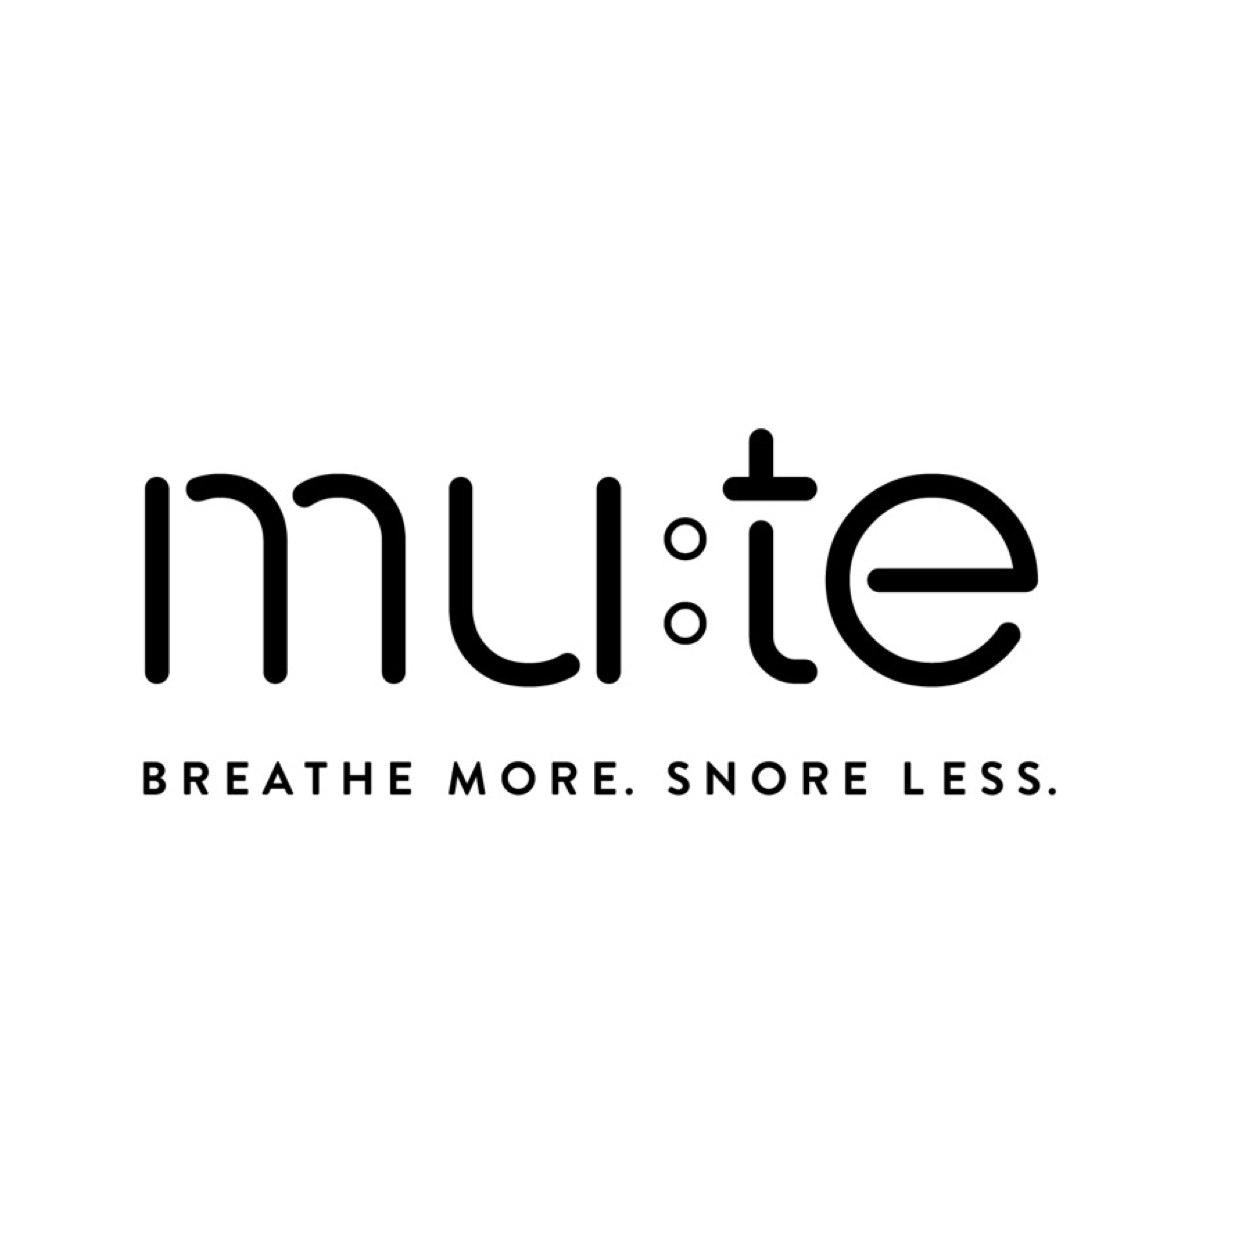 Snoring disrupts the sleep quality and the lives of millions of people worldwide.
Mute has been designed to give snoring the silent treatment.